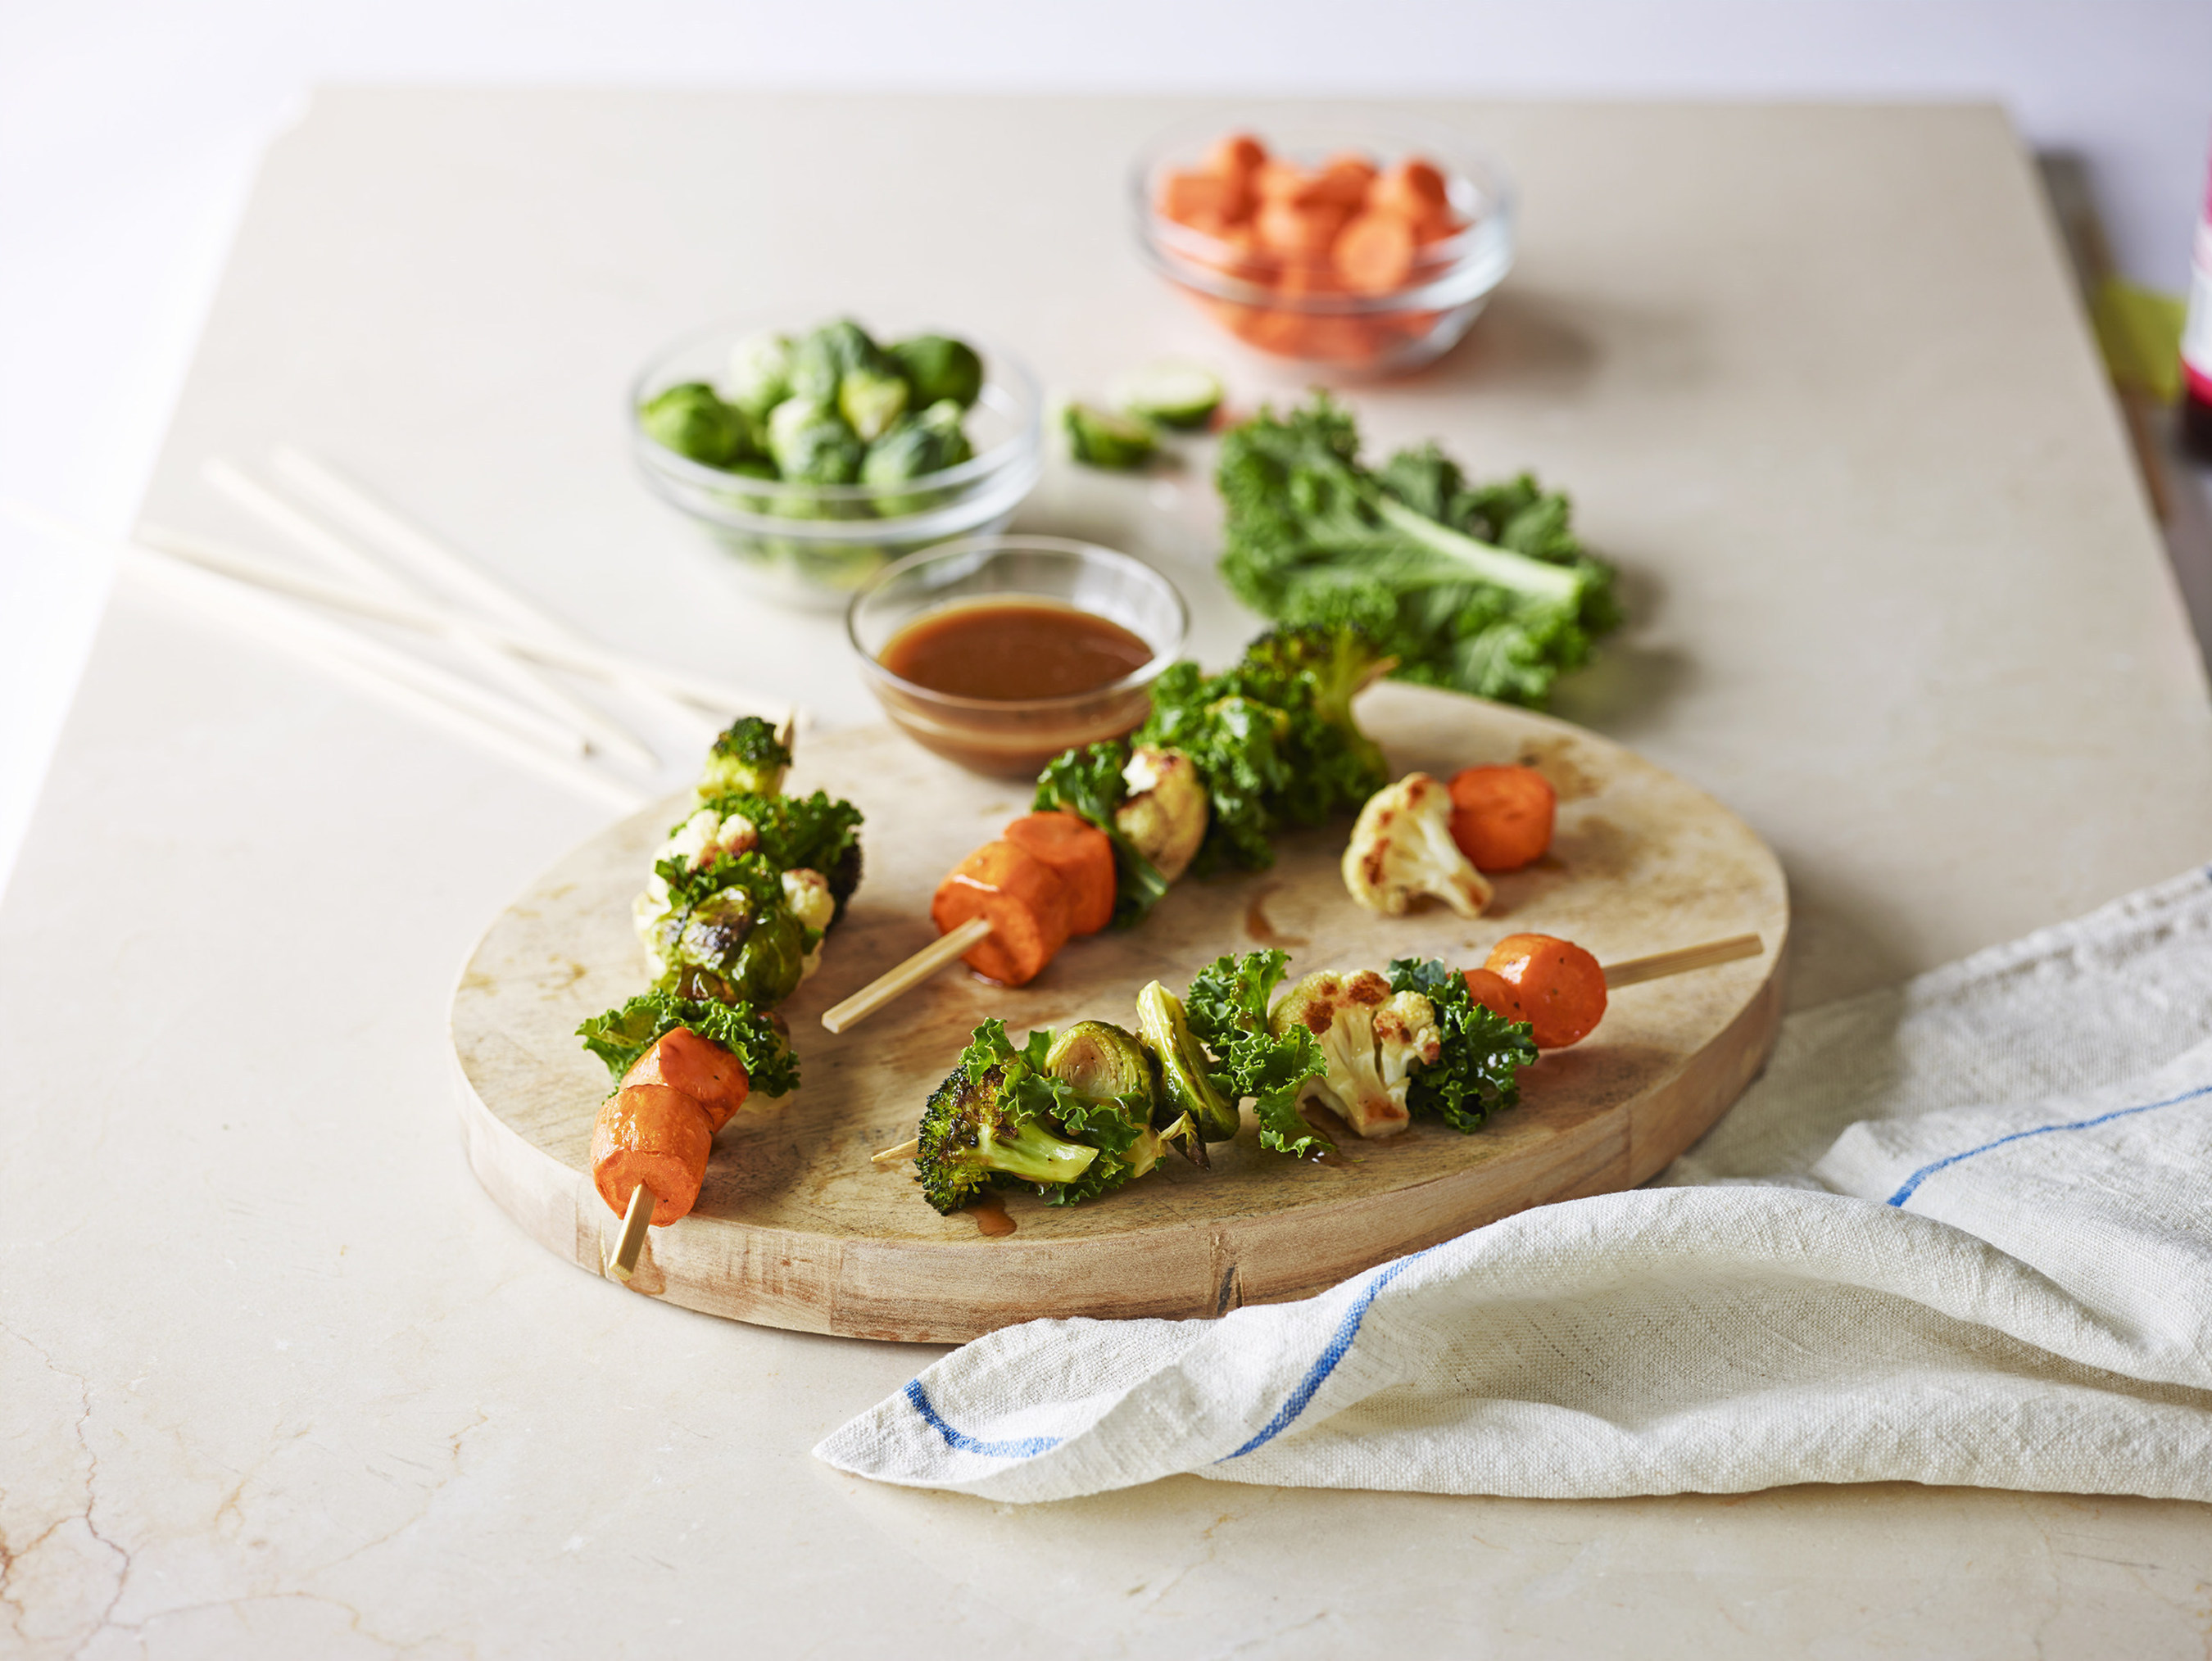 Chef Bill Telepan's new salad-on-a-stick recipe features seasonal vegetables and Hidden Valley.